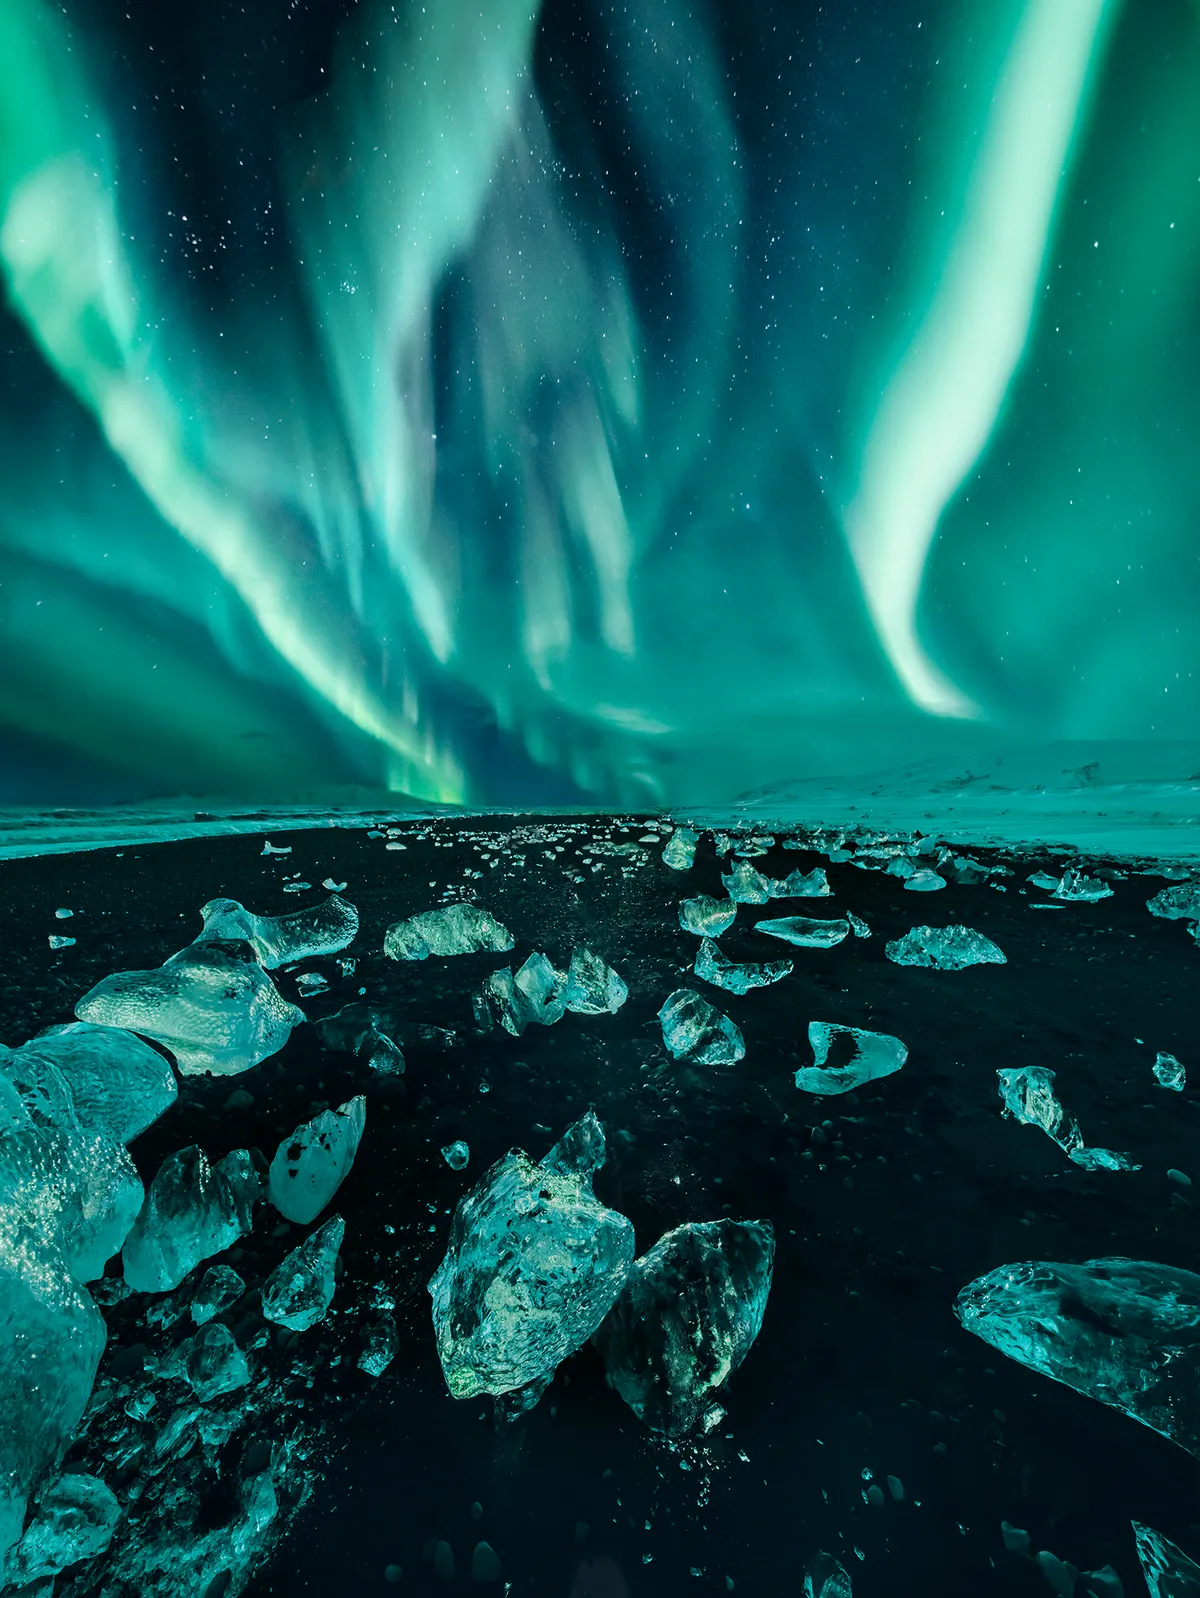 Iceland Kristina Makeeva (Russia). Highly commended, Aurorae. Equipment: Sony a7R III camera, 14 mm lens.